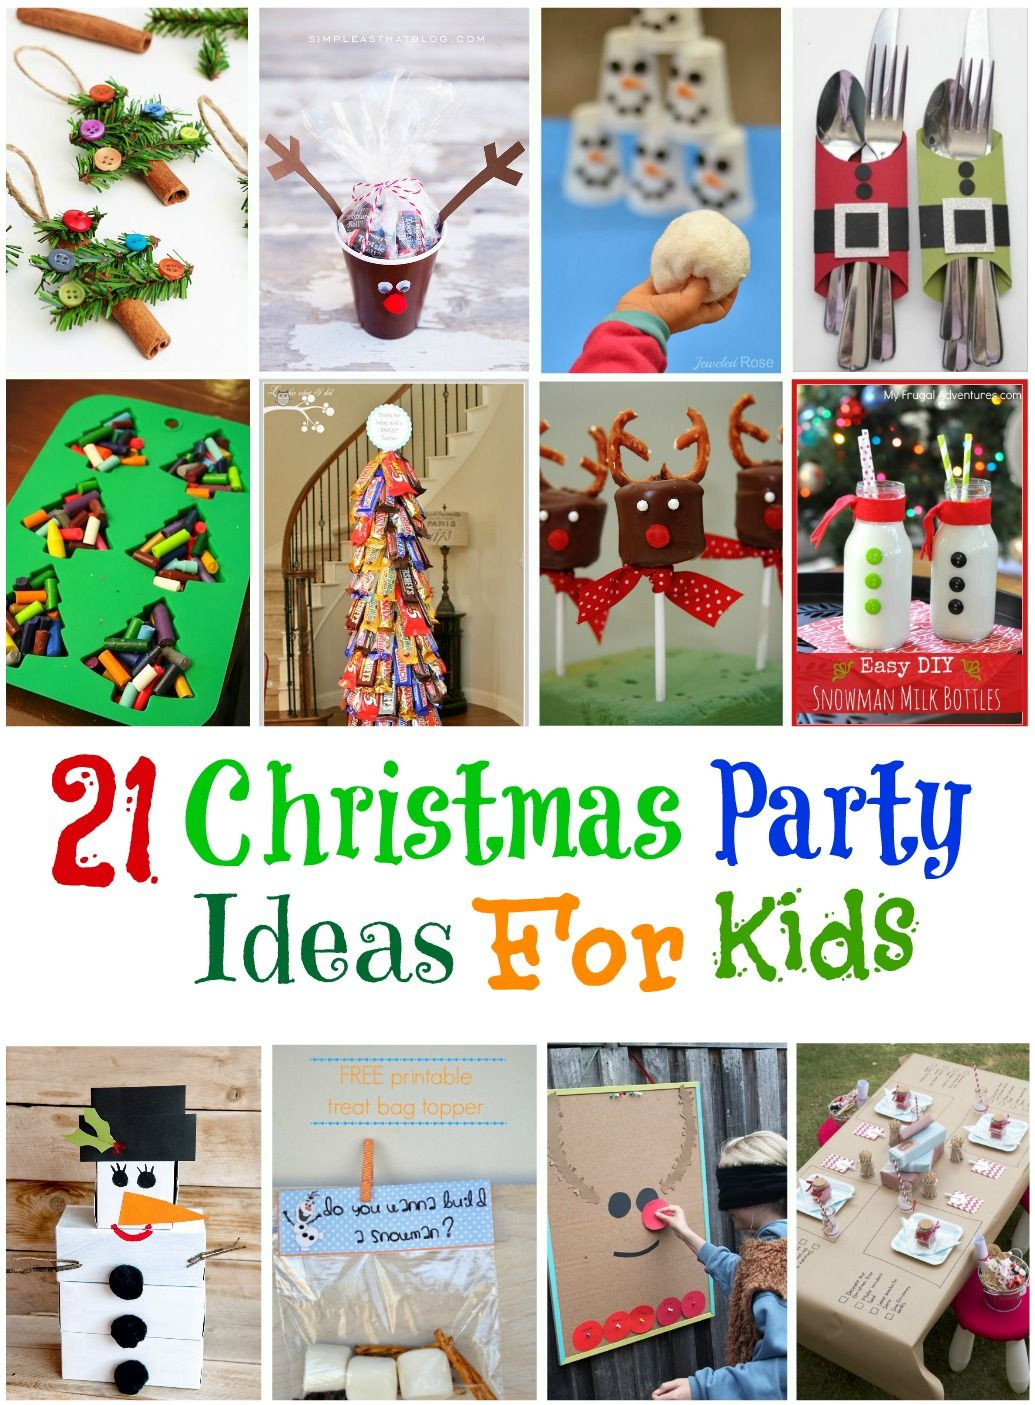 Preschool Christmas Party Ideas
 21 Amazing Christmas Party Ideas for Kids